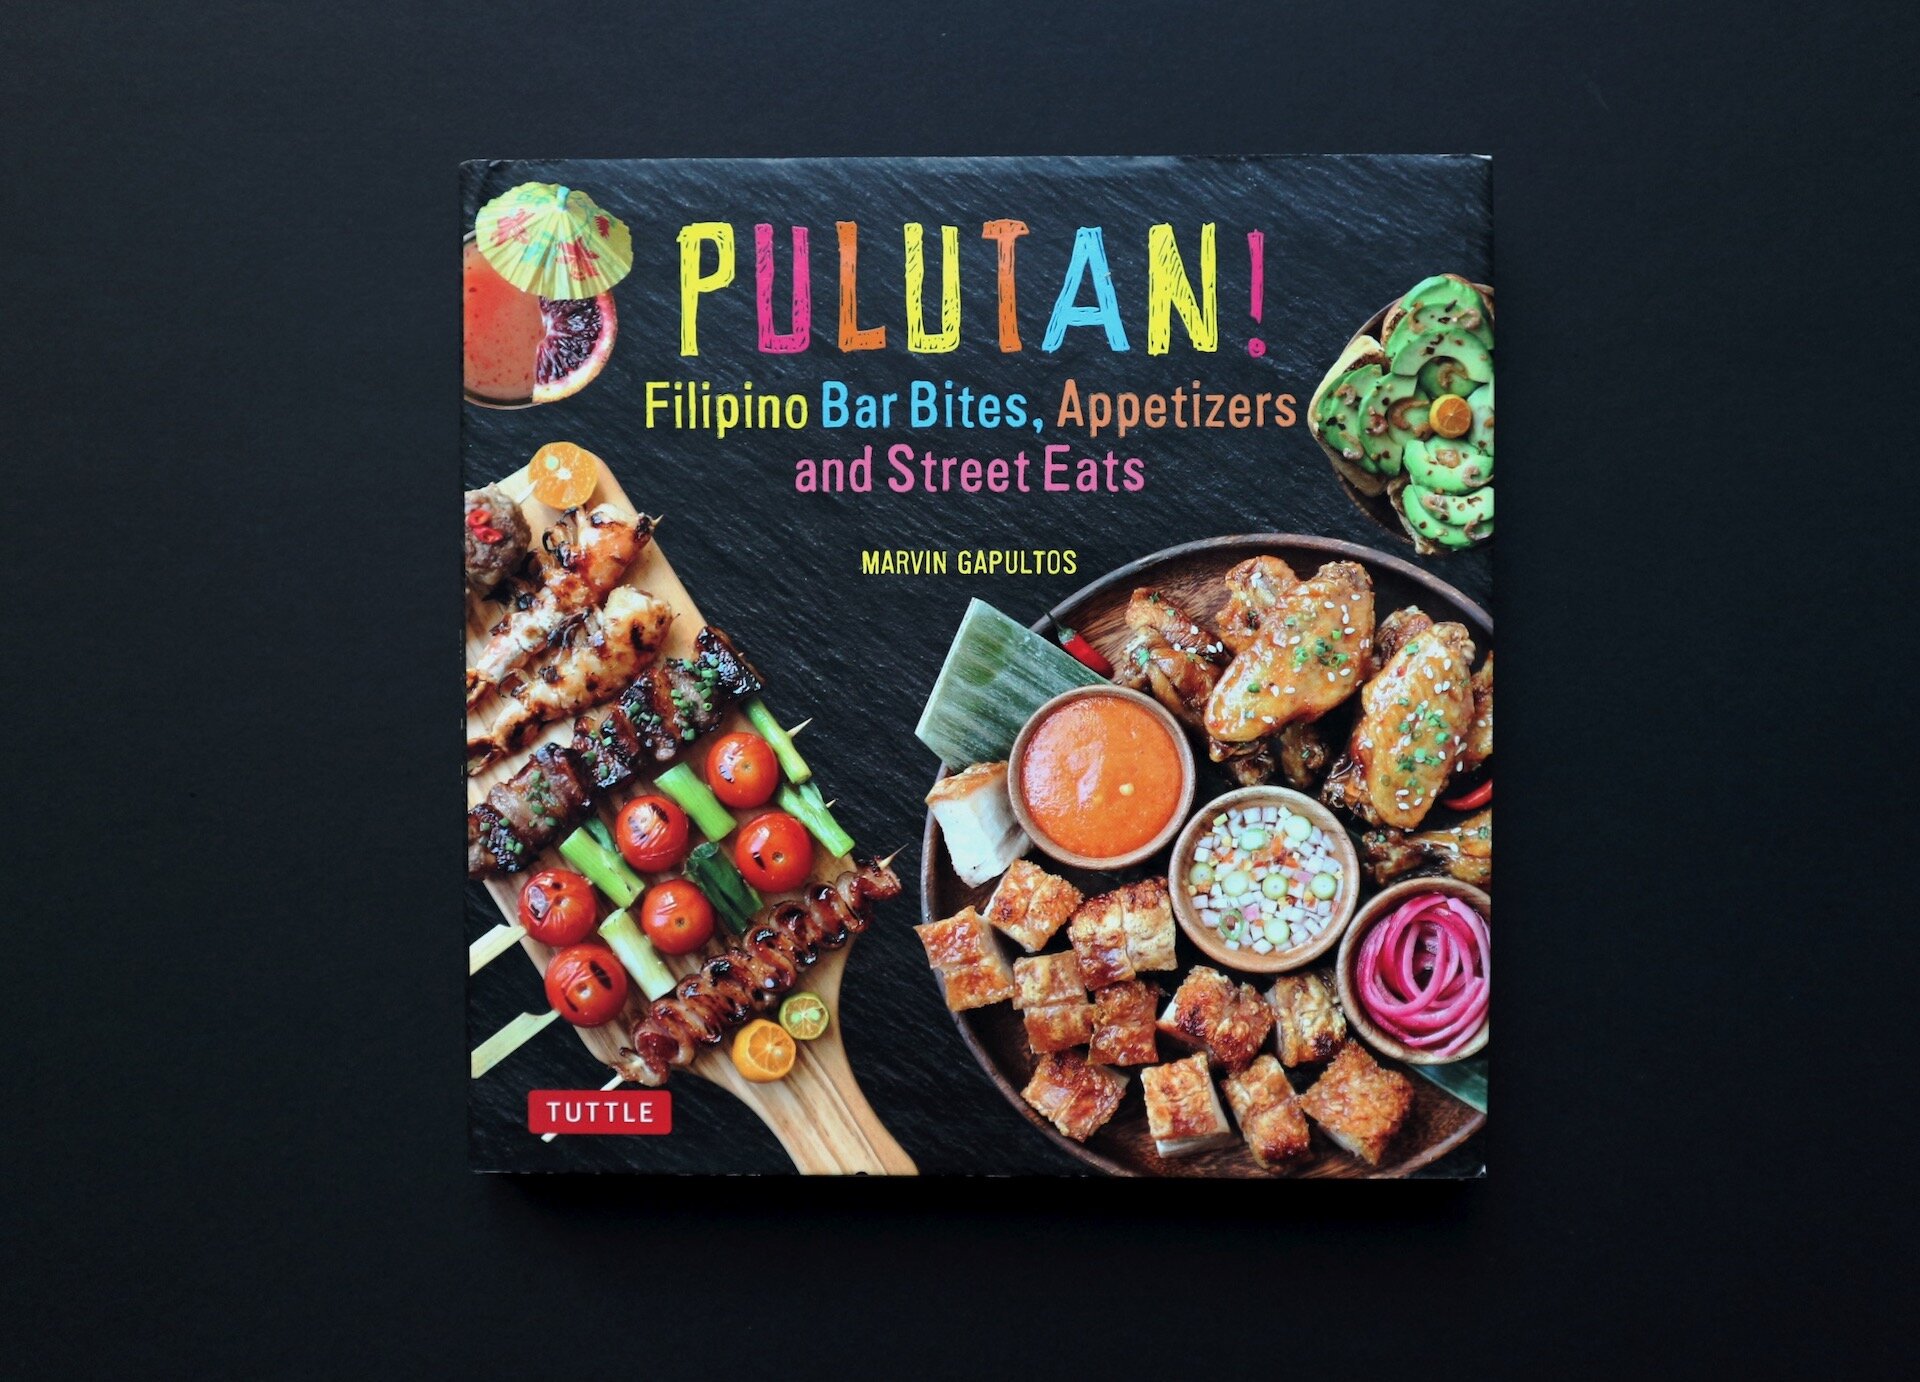 Pulutan: Filipino Bar Bites, Appetizers and Street Eats by Marvin Gapultos